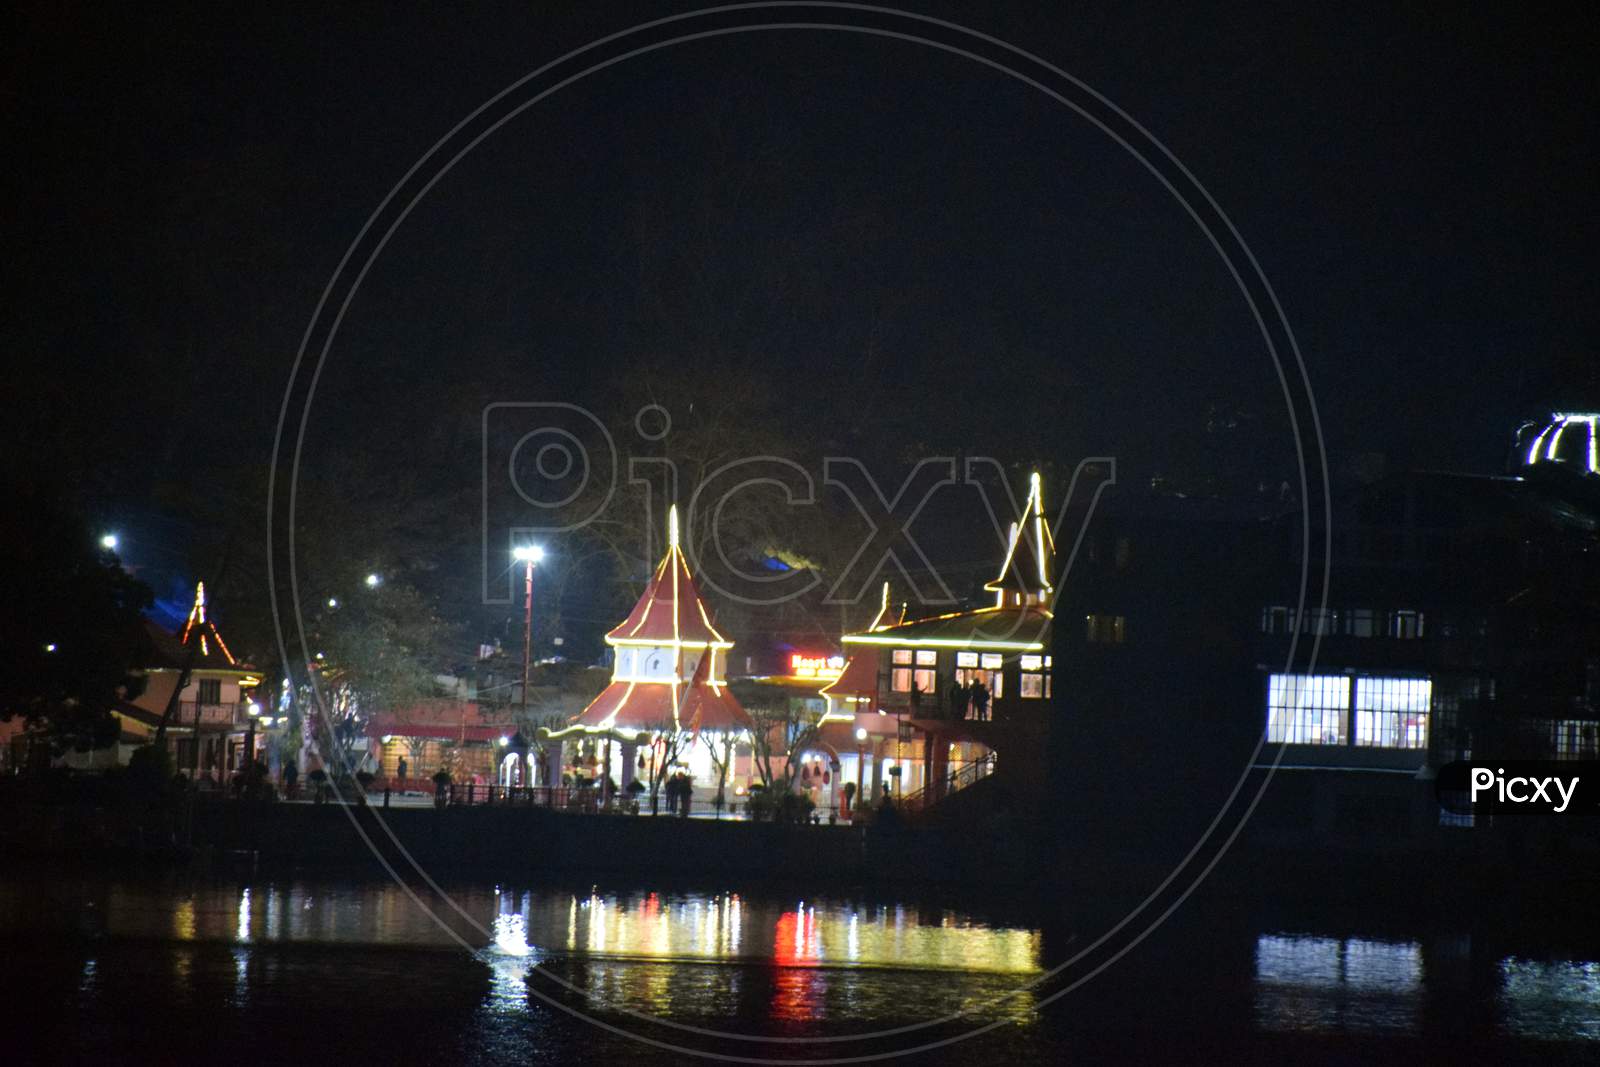 Night Picture Of Temple In Uttarakhand